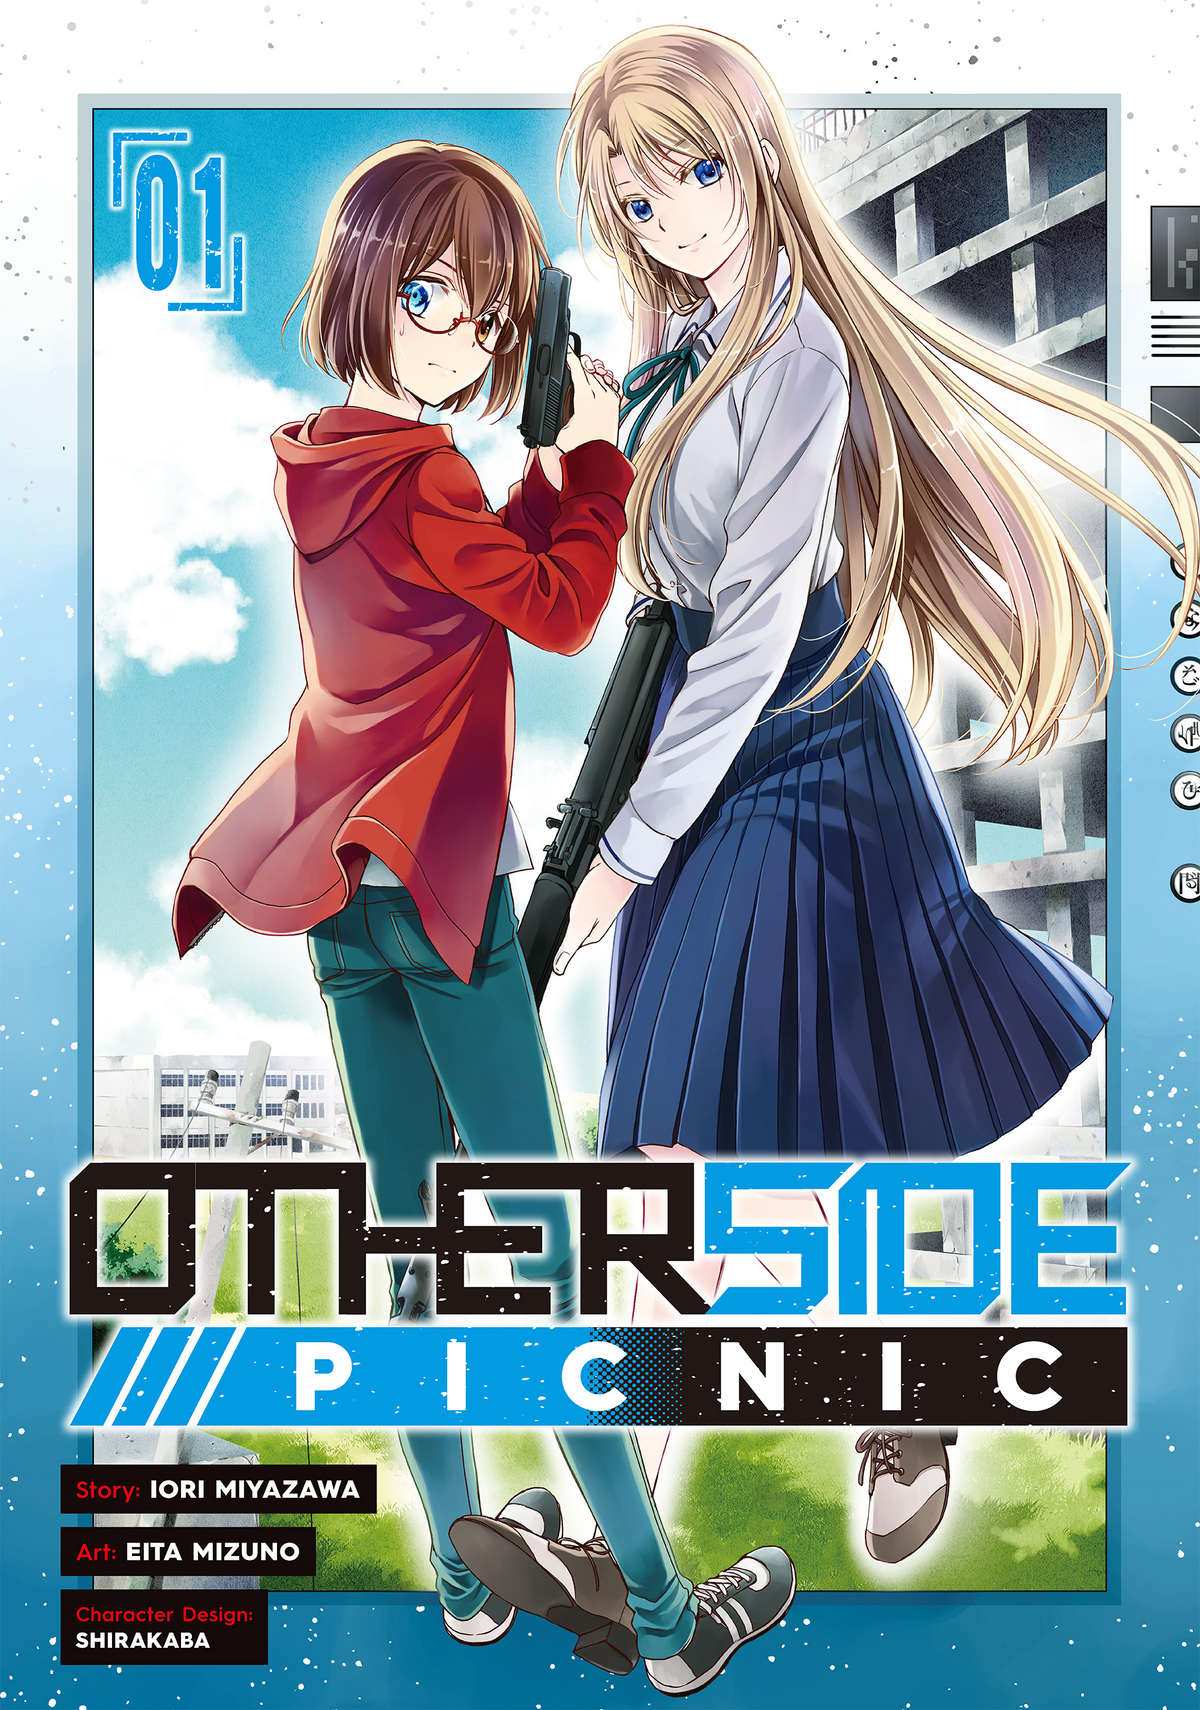 In Another World, Otherside Picnic Got the Adaptation It Deserved – OTAQUEST